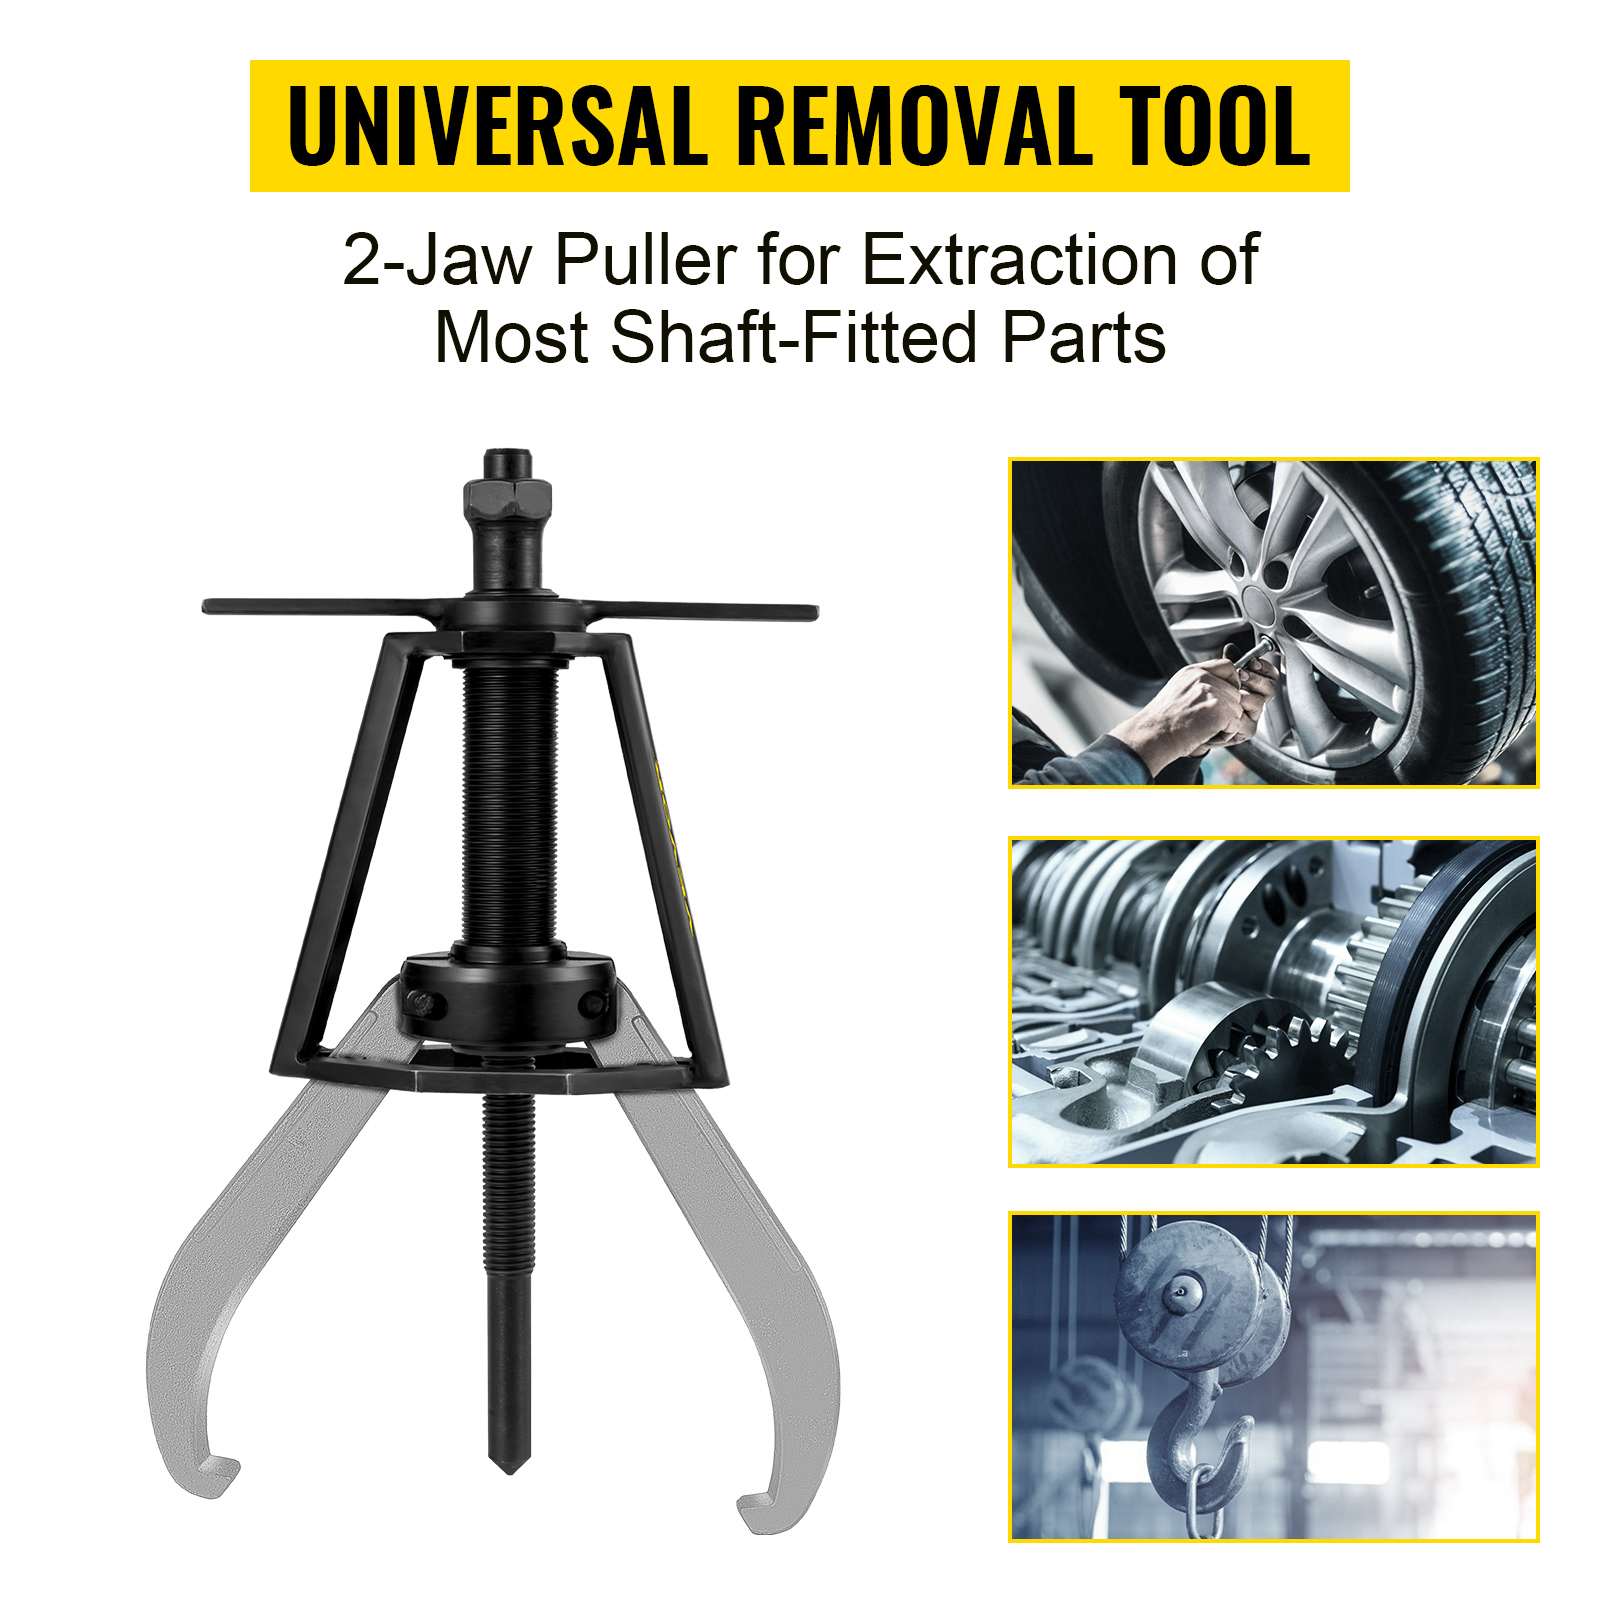 6 Ton/13224 LBS Capacity Manual Puller Pulleys 14-1/2 Overall Length Gear Removal Tools For Slide Gears VEVOR Gear Puller 2 Jaw Puller 14-3/5-21-1/2 Spread Reach and 3-1/5-10-3/5 Spread Range 